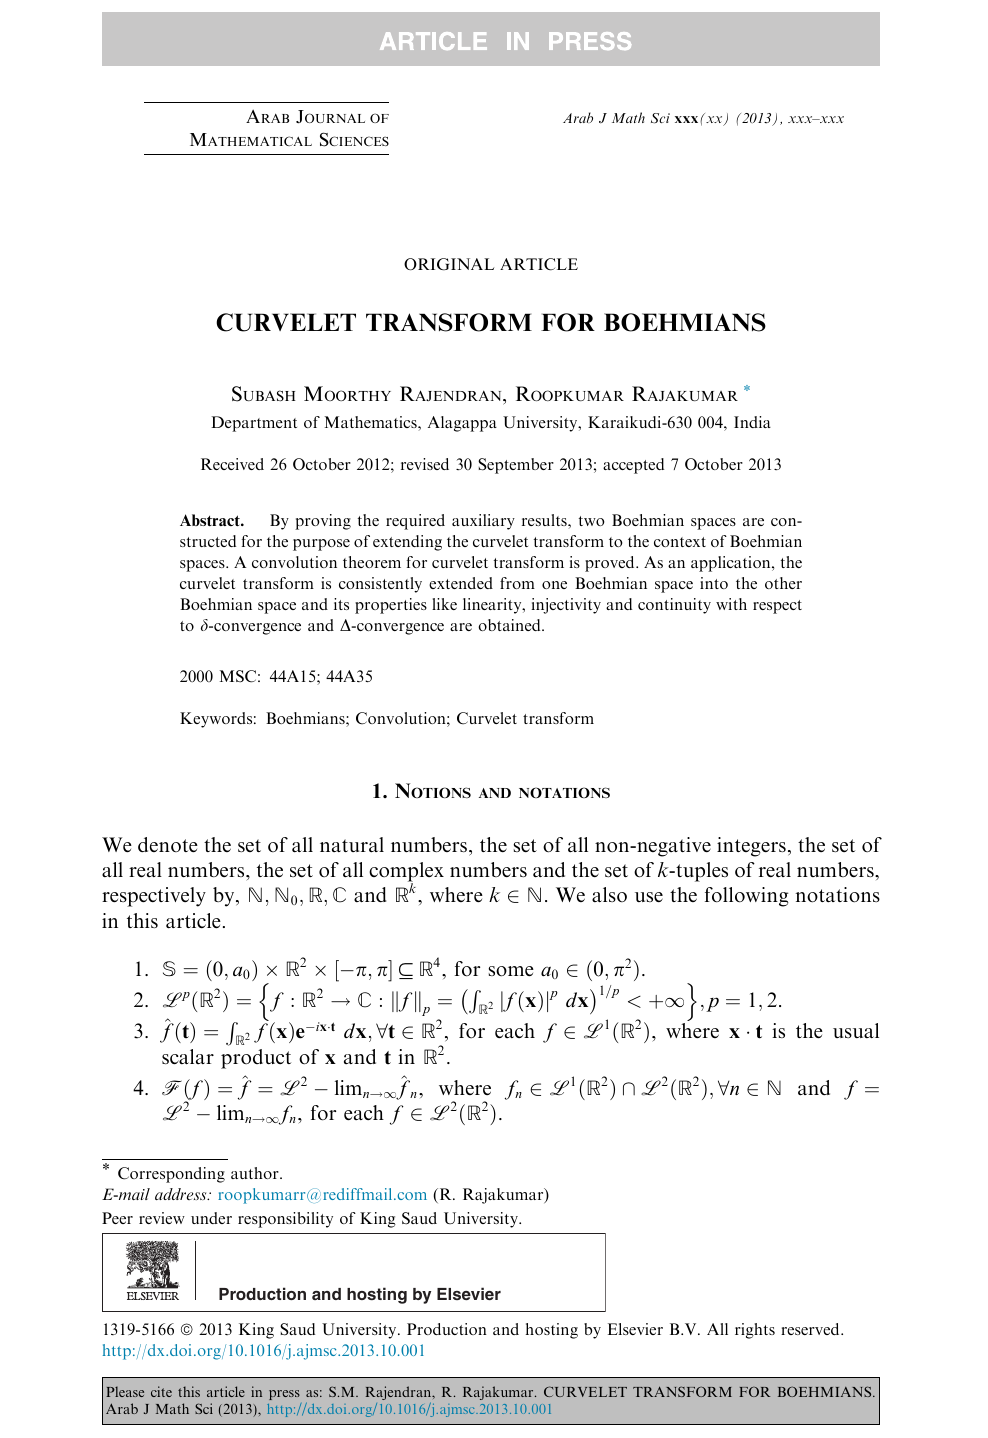 Curvelet Transform For Boehmians Topic Of Research Paper In Mathematics Download Scholarly Article Pdf And Read For Free On Cyberleninka Open Science Hub